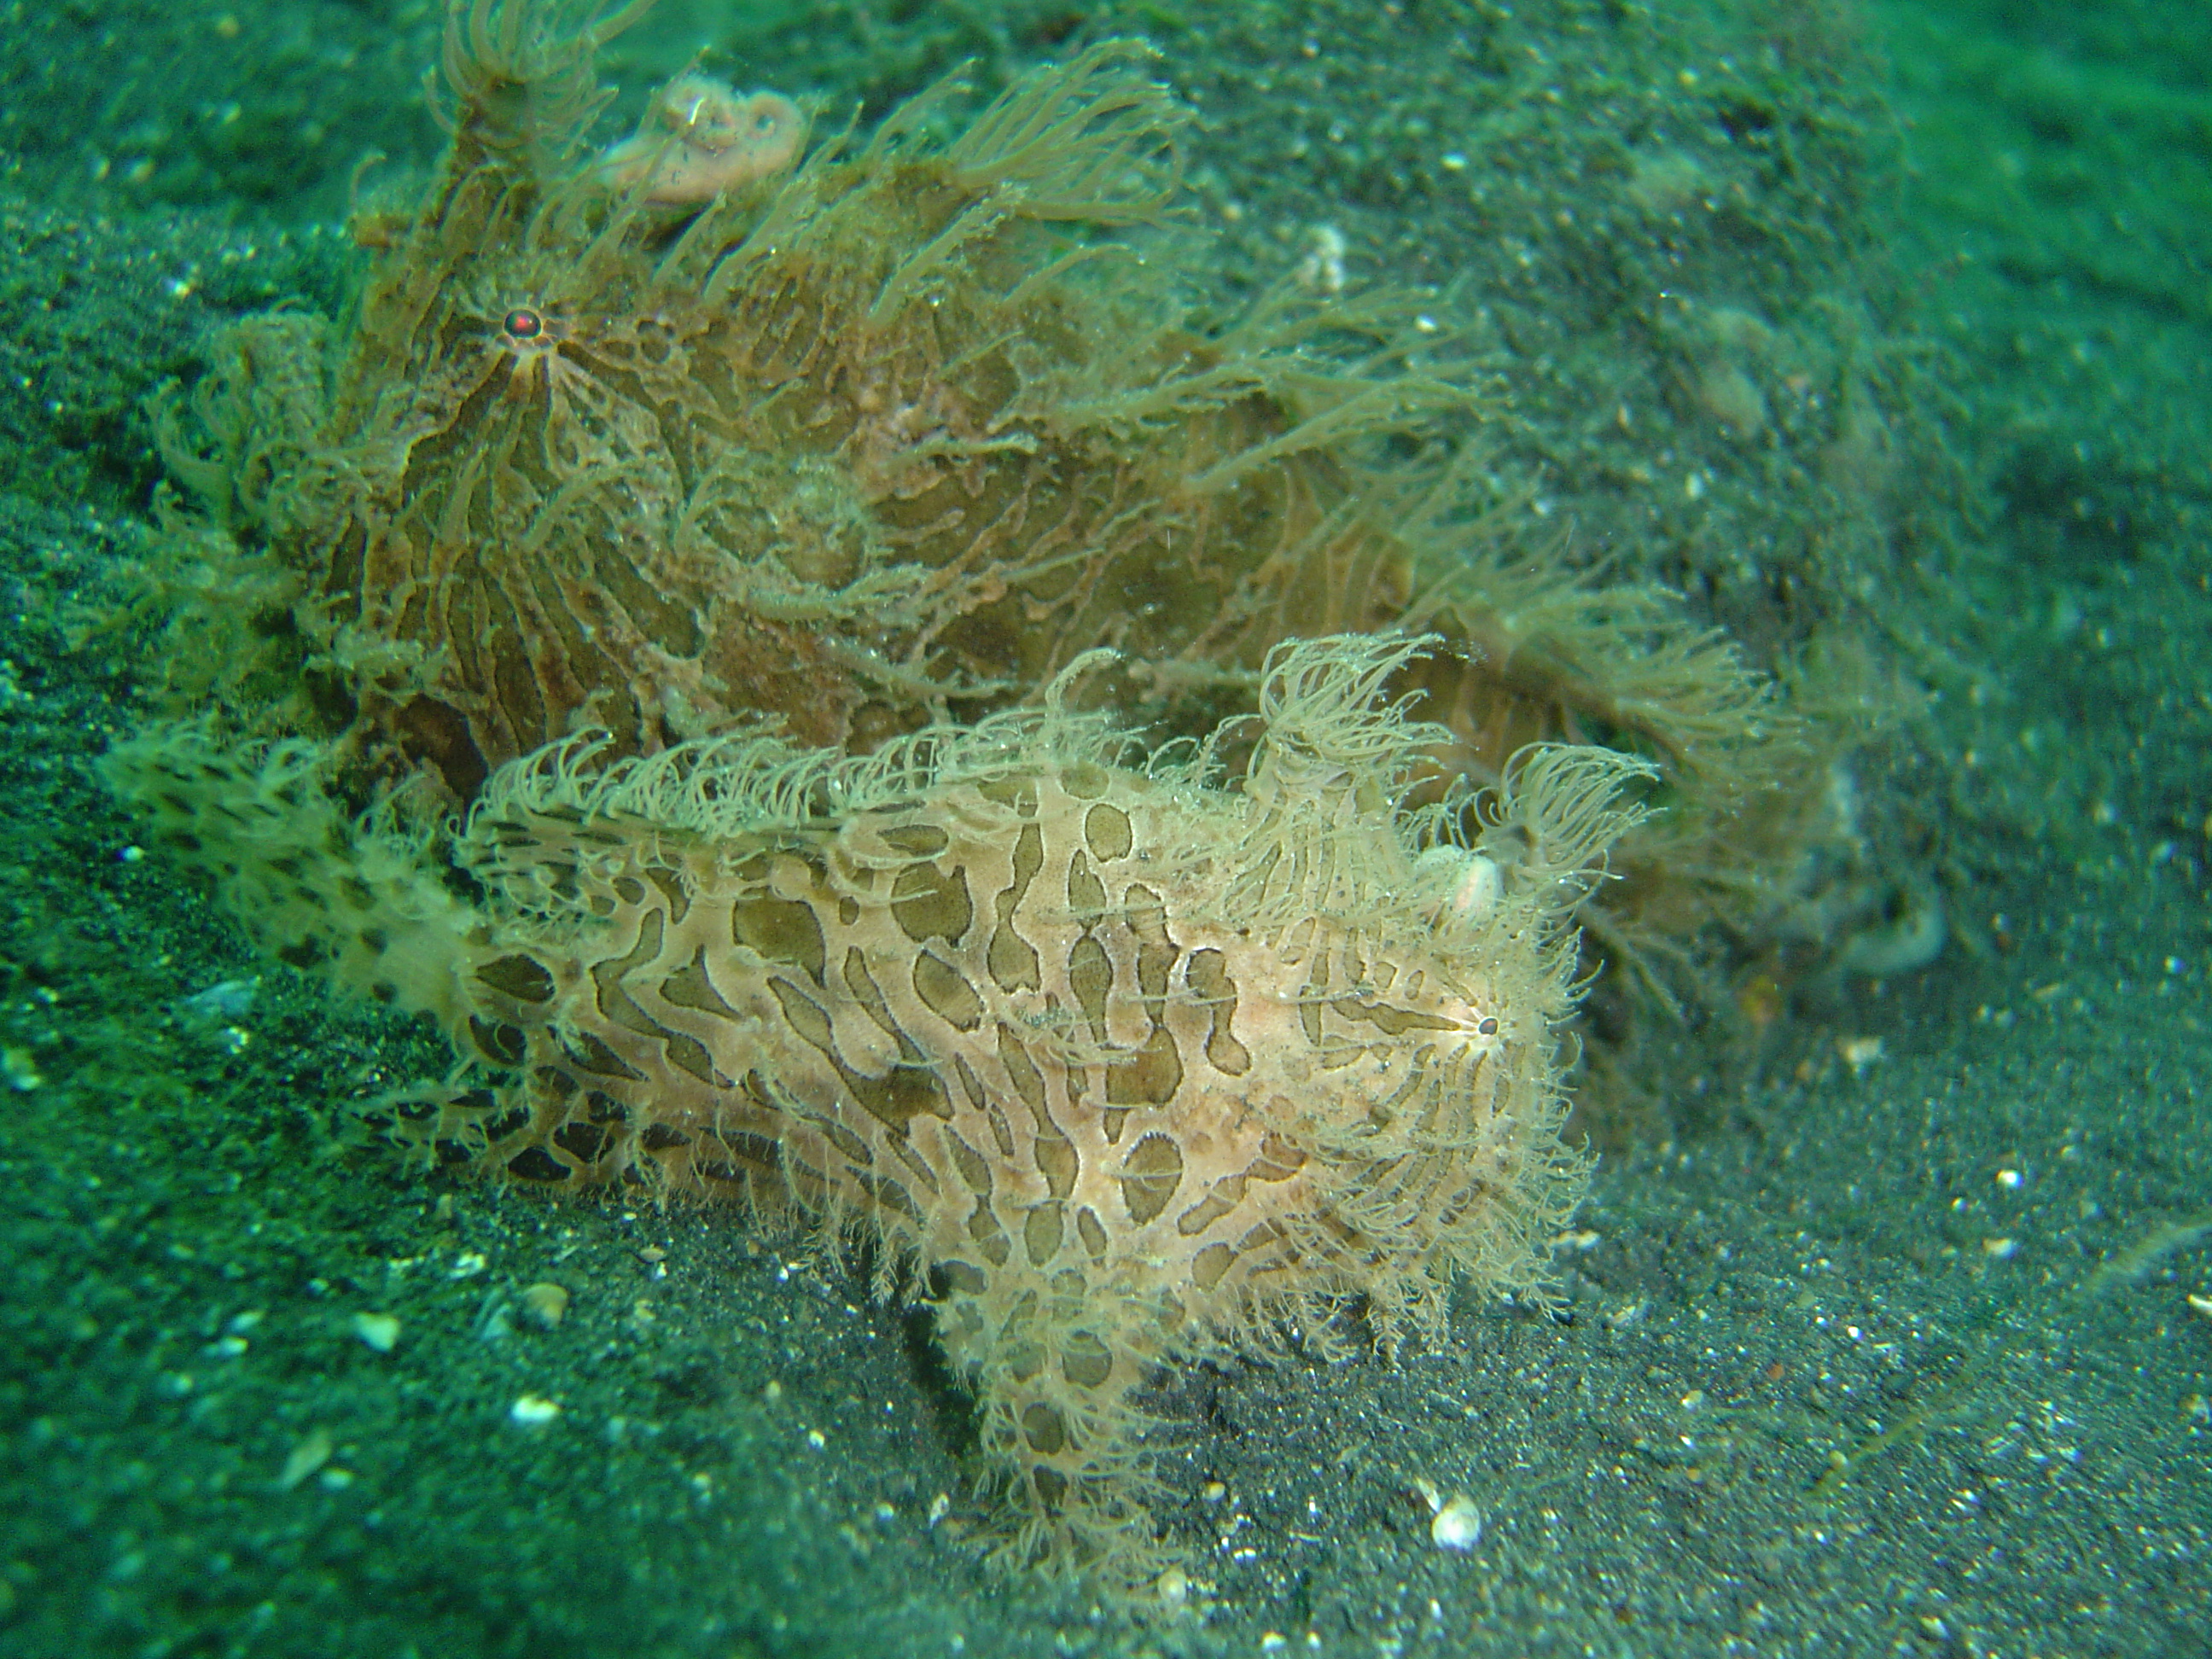 hairy frogfishes